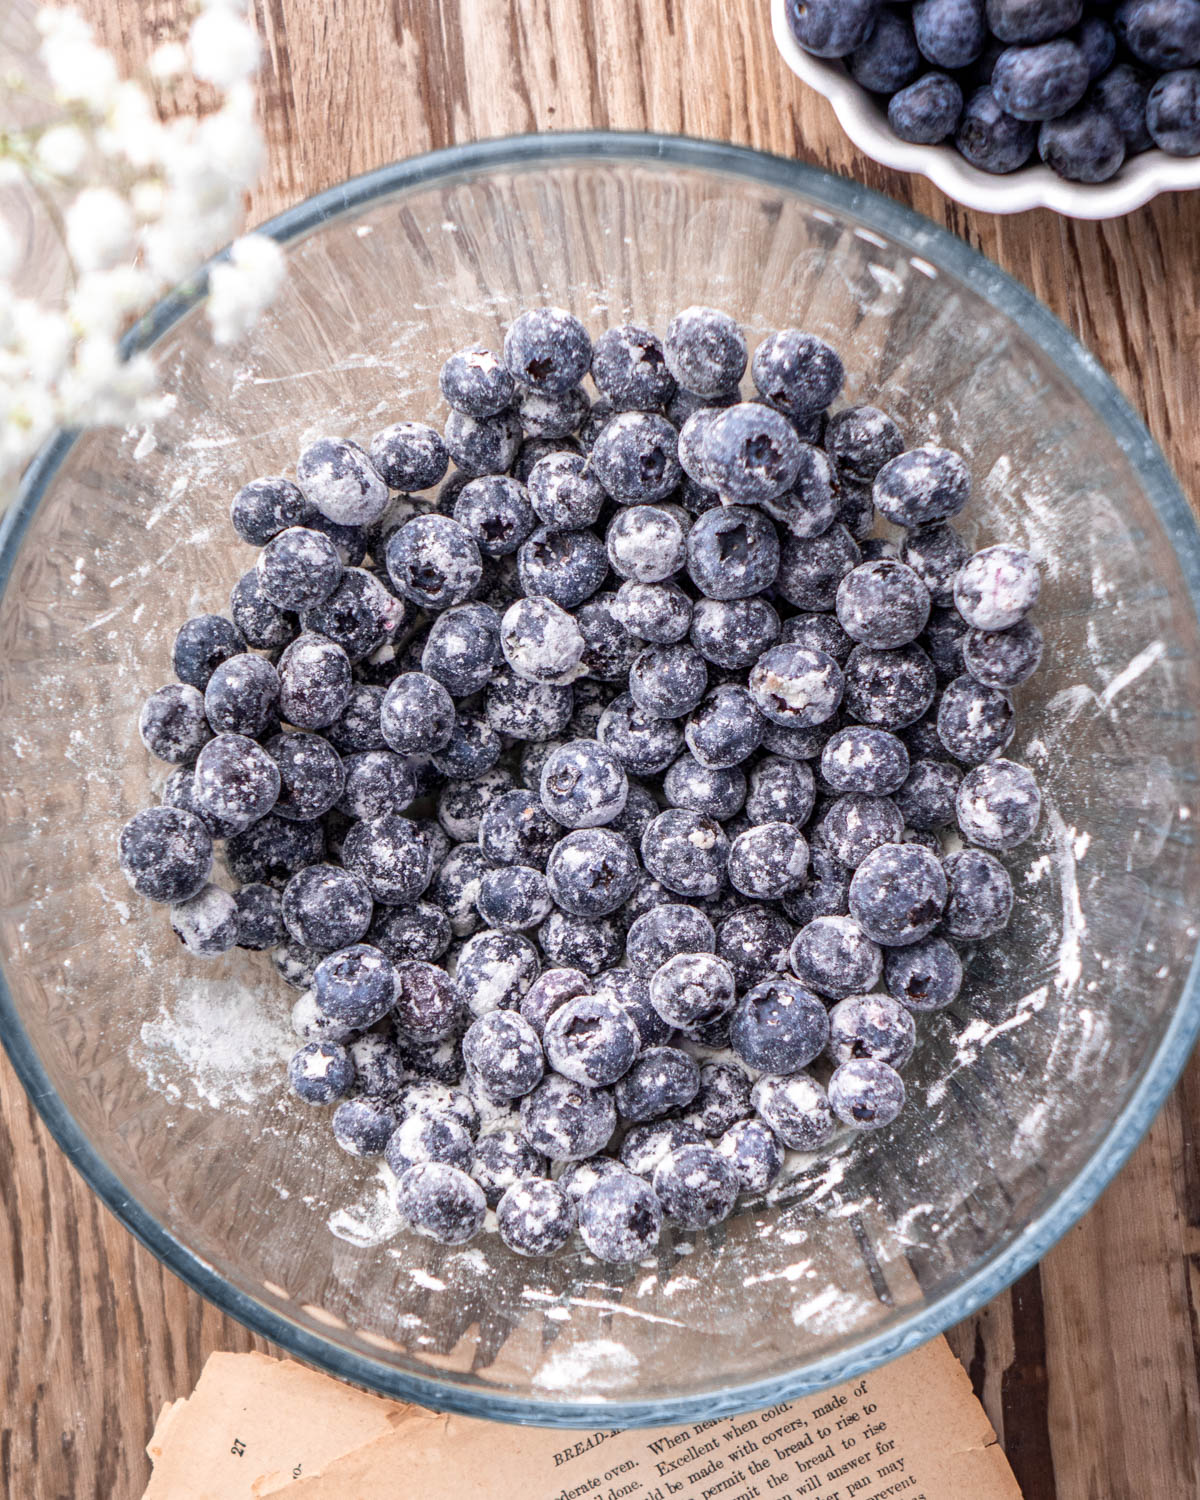 Small glass bowl with flour coated blueberries